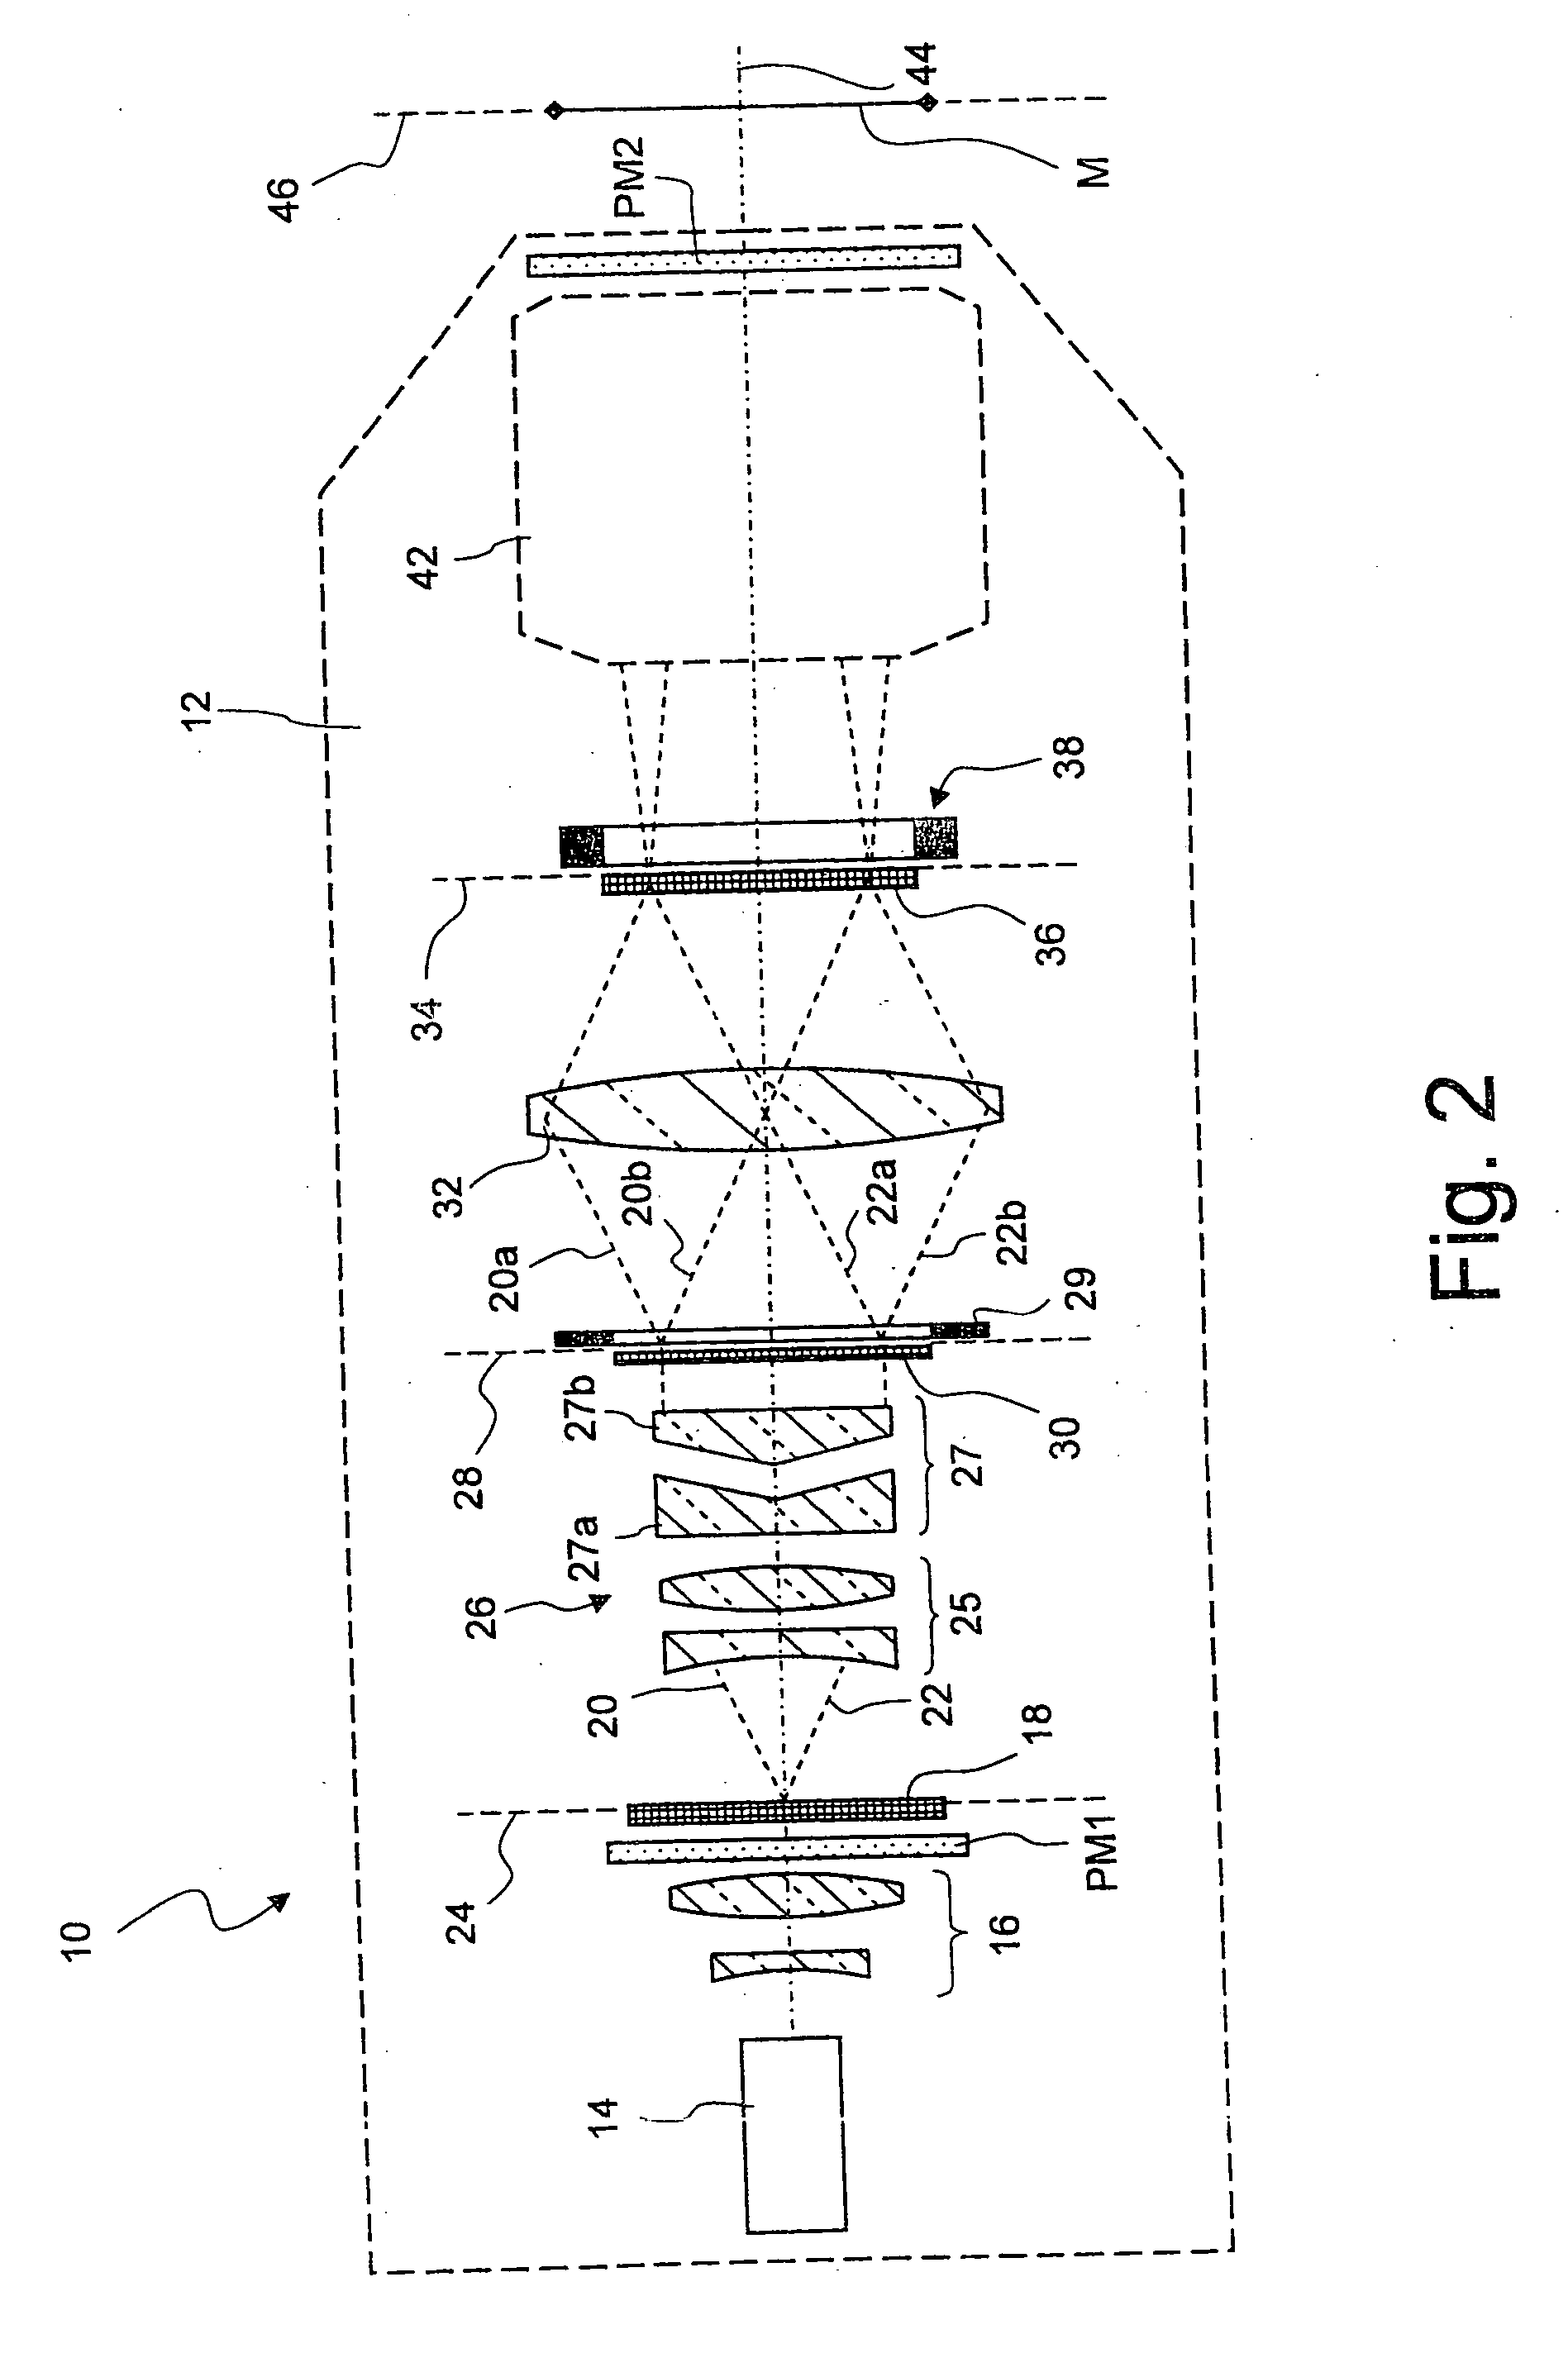 Illumination system for a microlithographic projection exposure apparatus